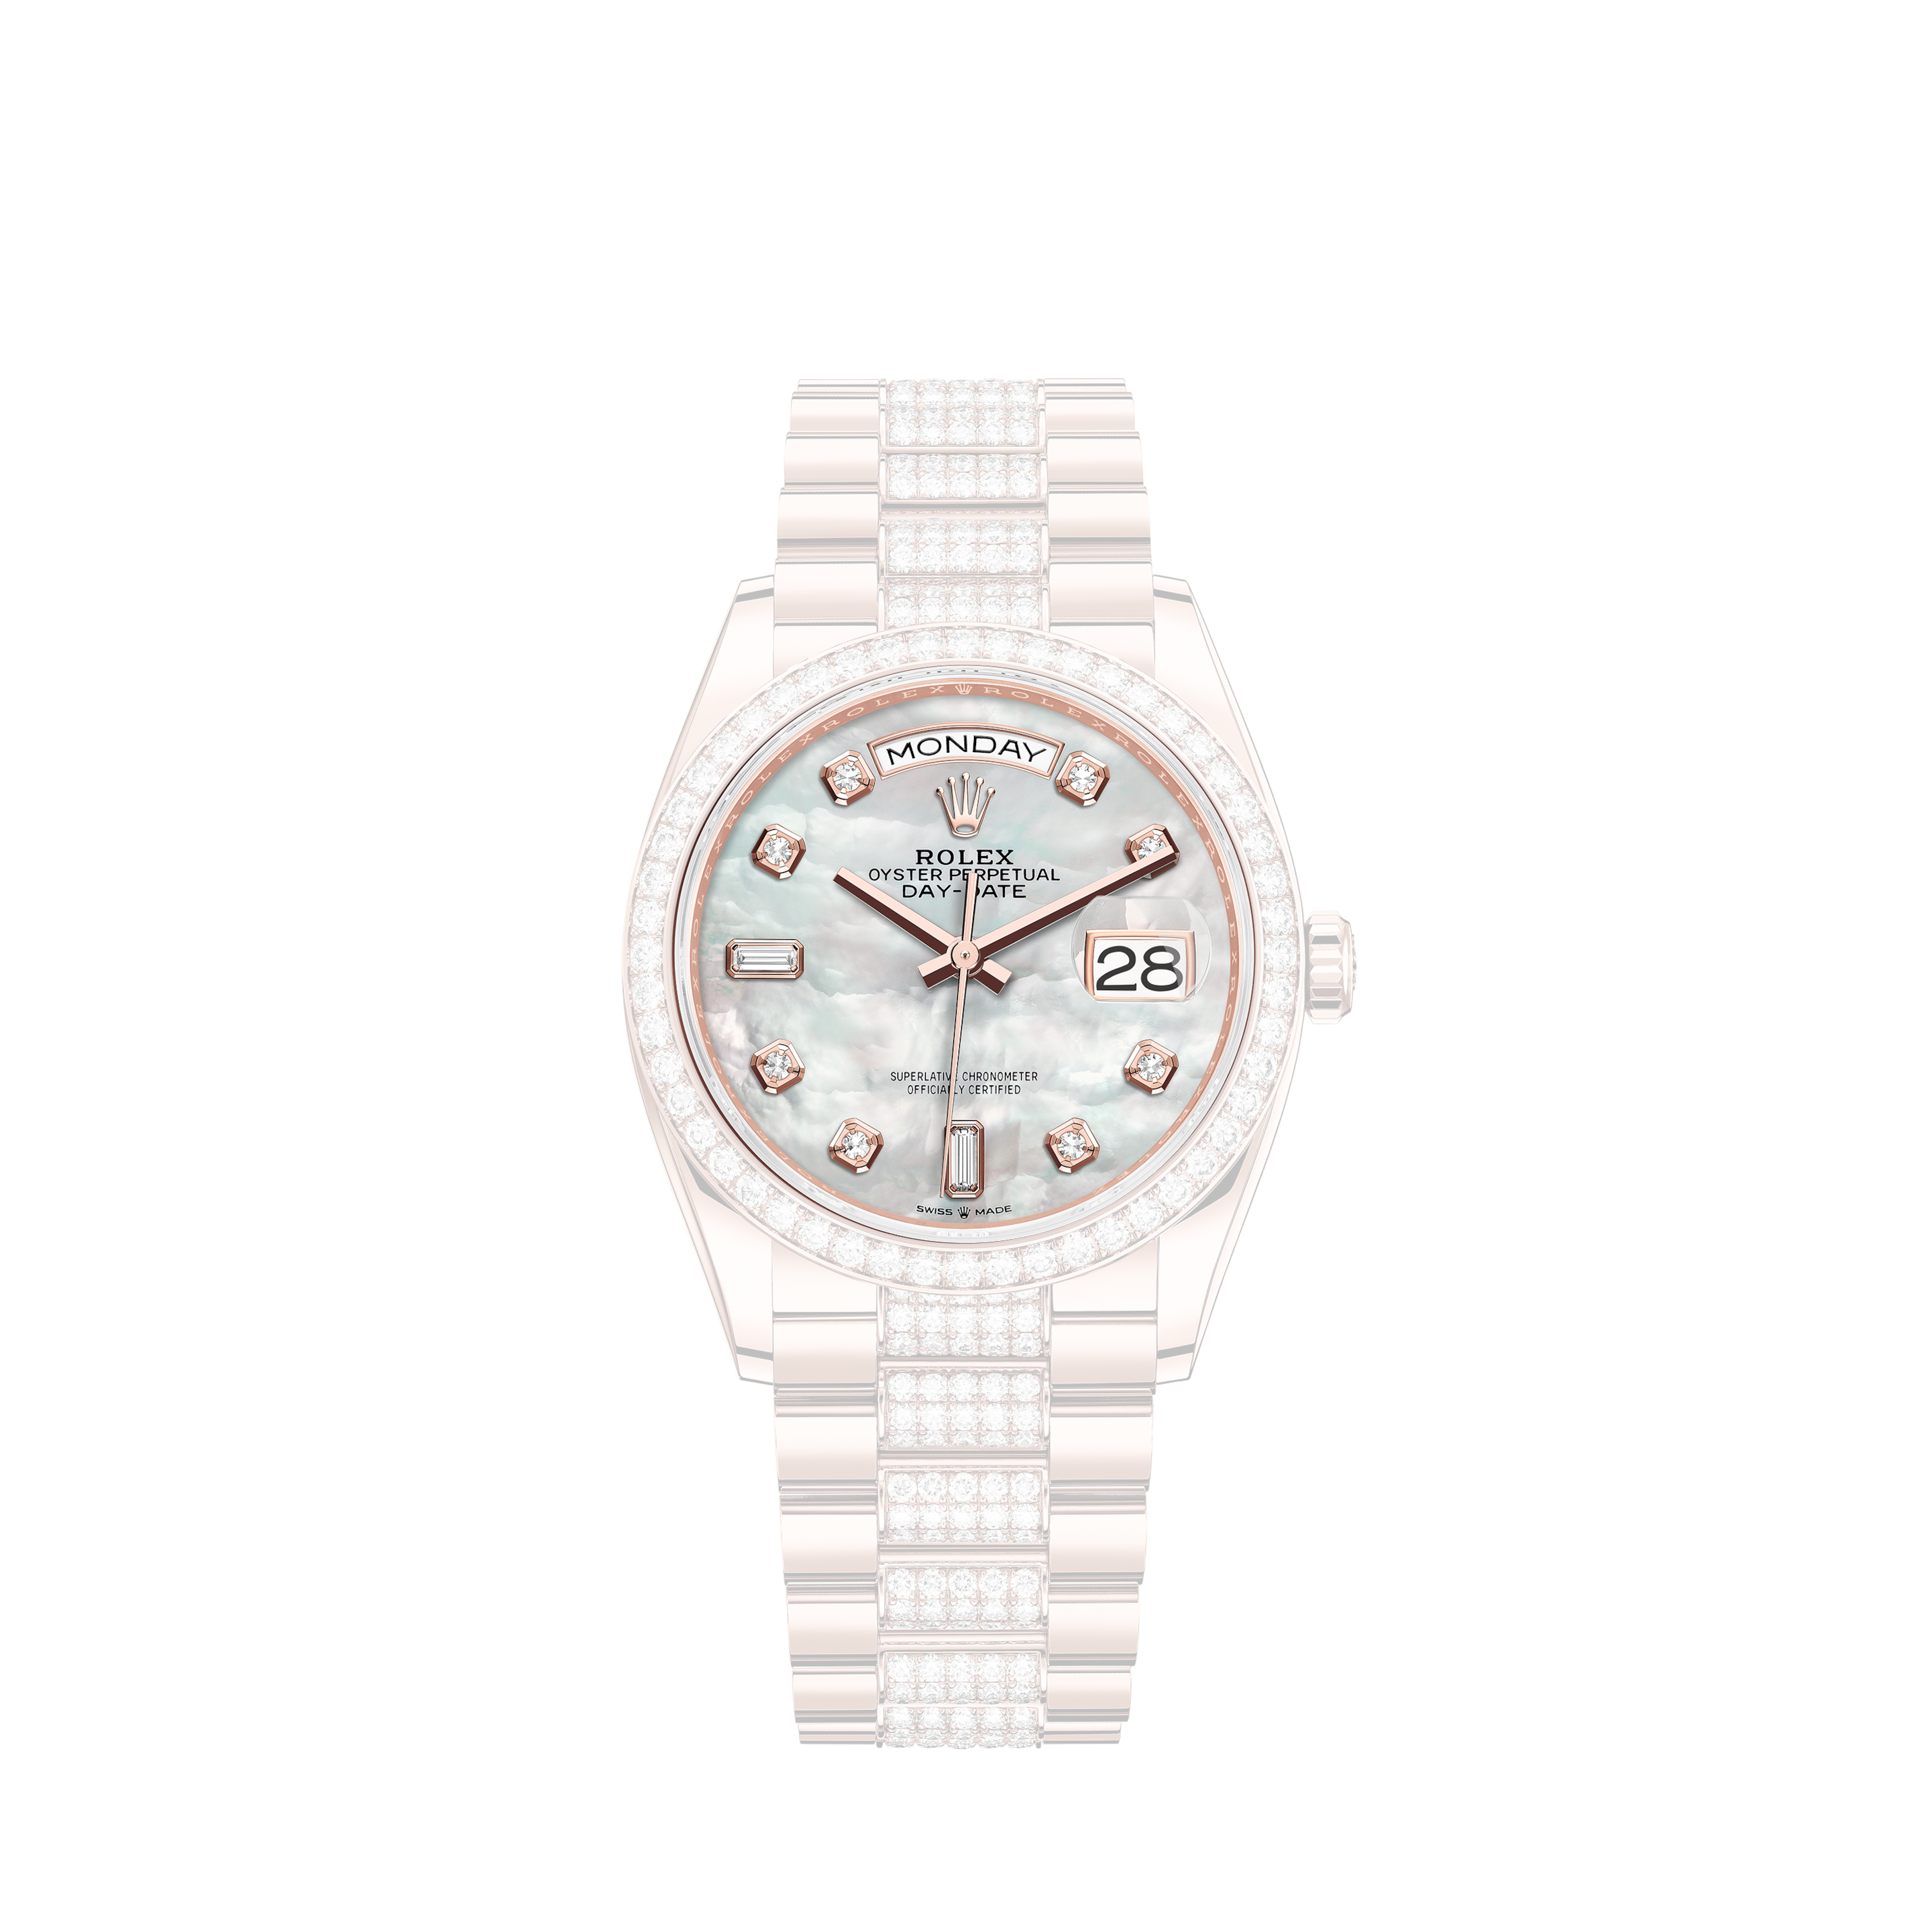 Rolex 36mm Datejust Pearl with Round & Baguette Diamond Dial Diamond Bezel & Lugs Two Tone WatchRolex 36mm Datejust Pink Dial with Round Diamond Numbers Oyster Perpetual Watch 16030